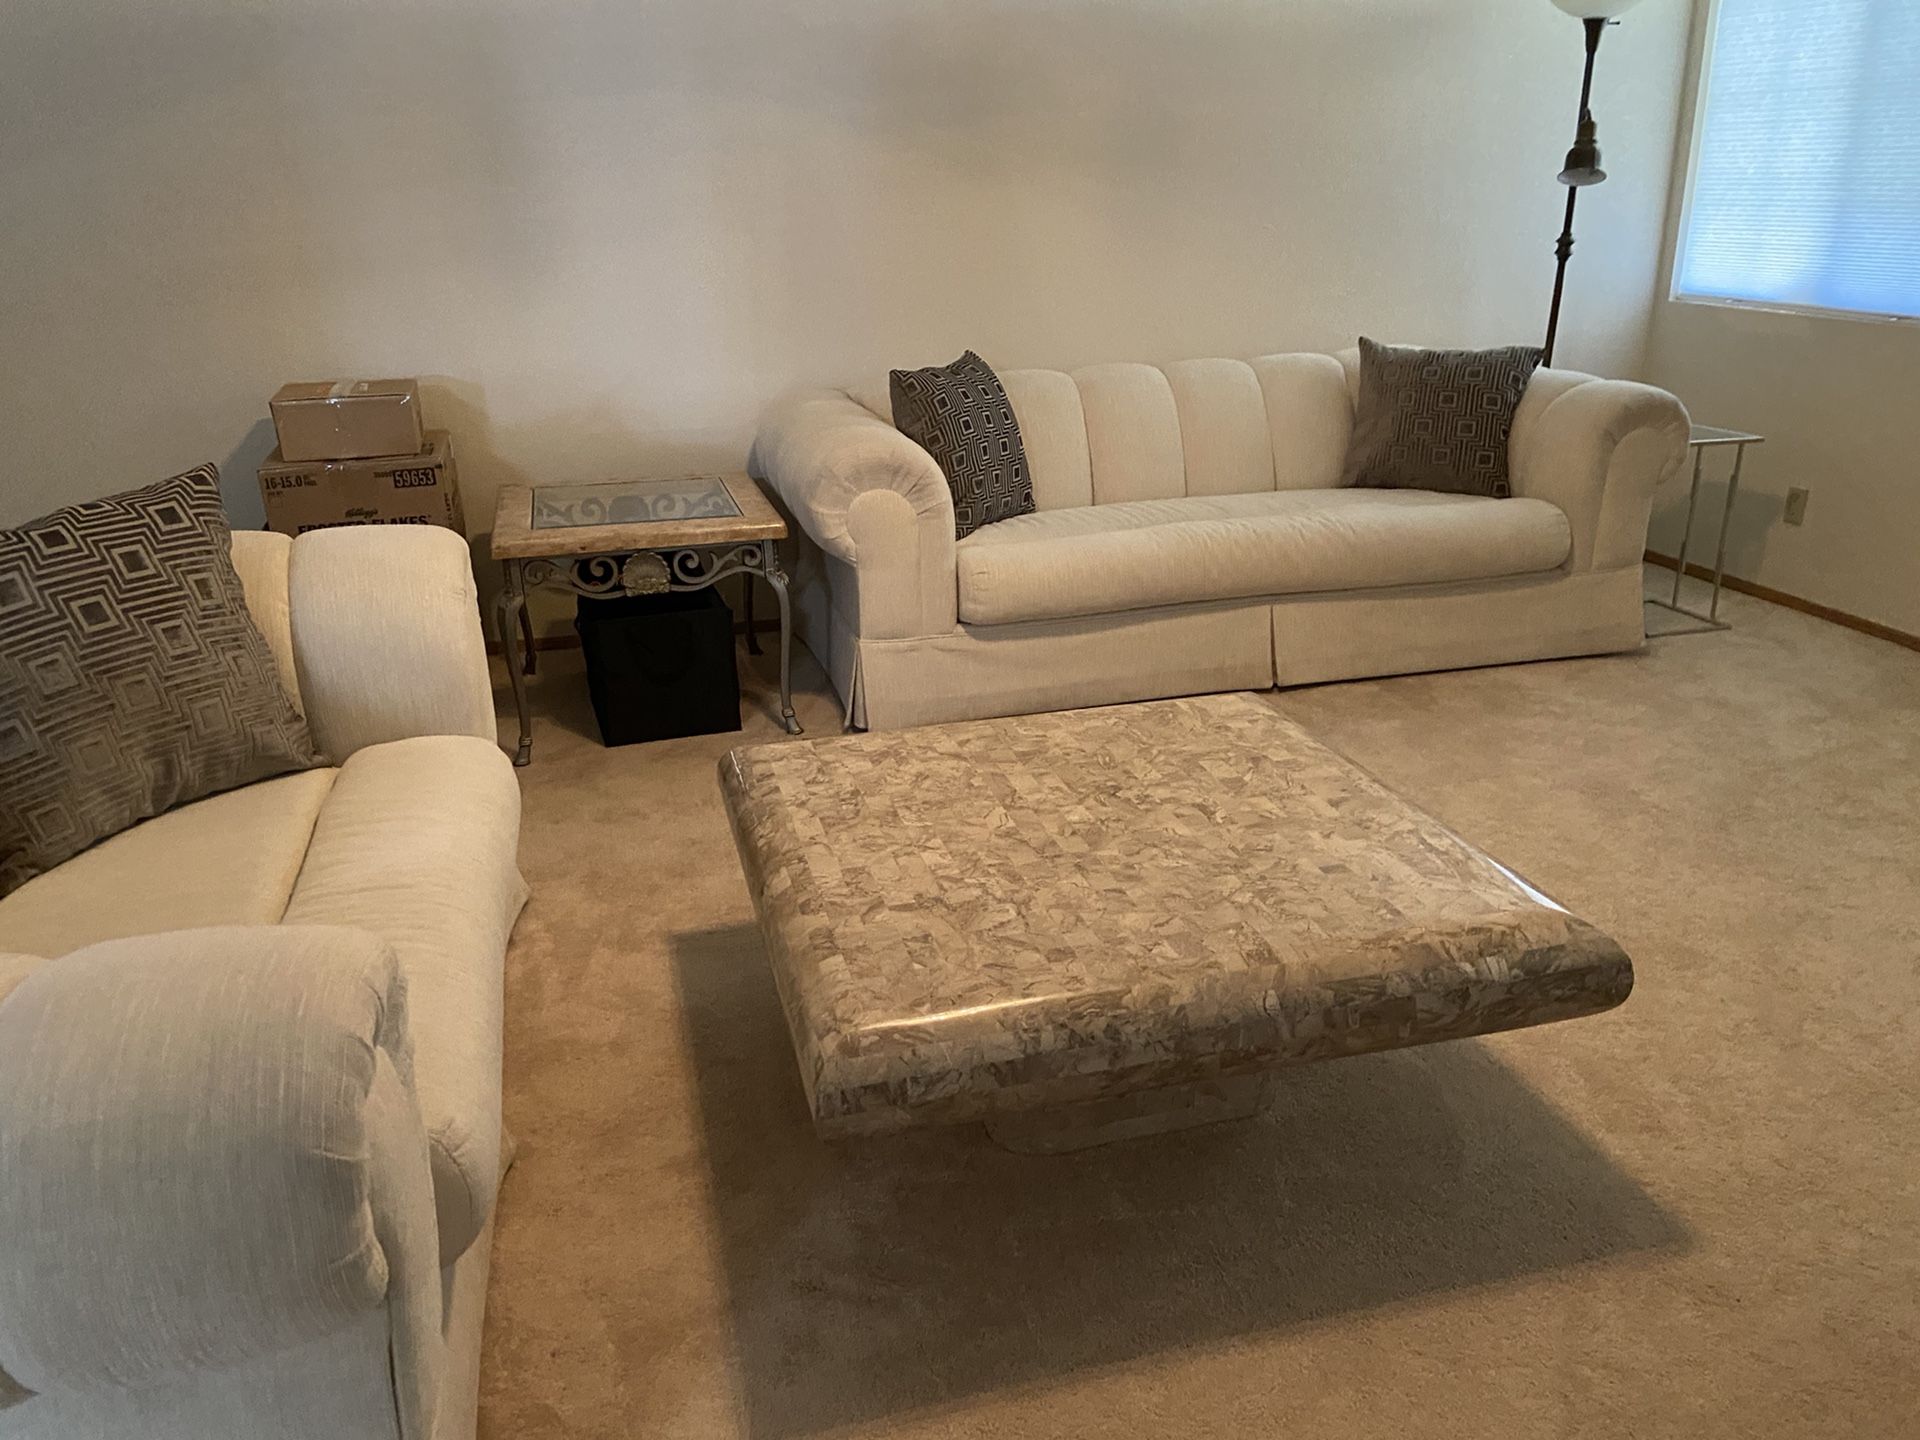 Off white cloth sofa & matching loveseat with unique coffee table. Total $400 OBO